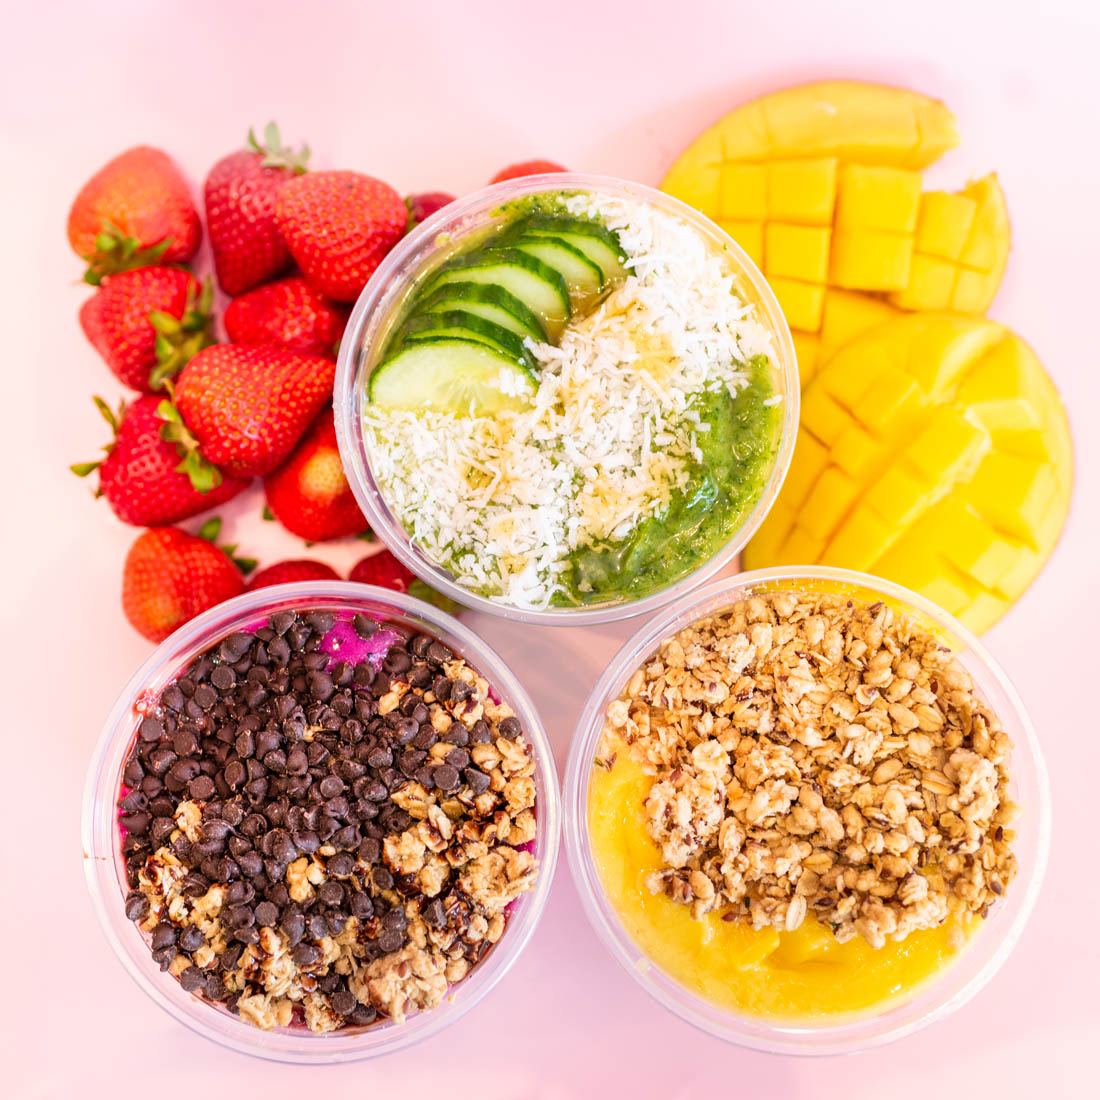 Rush Bowls smoothie bowls nutrition info in your local area.